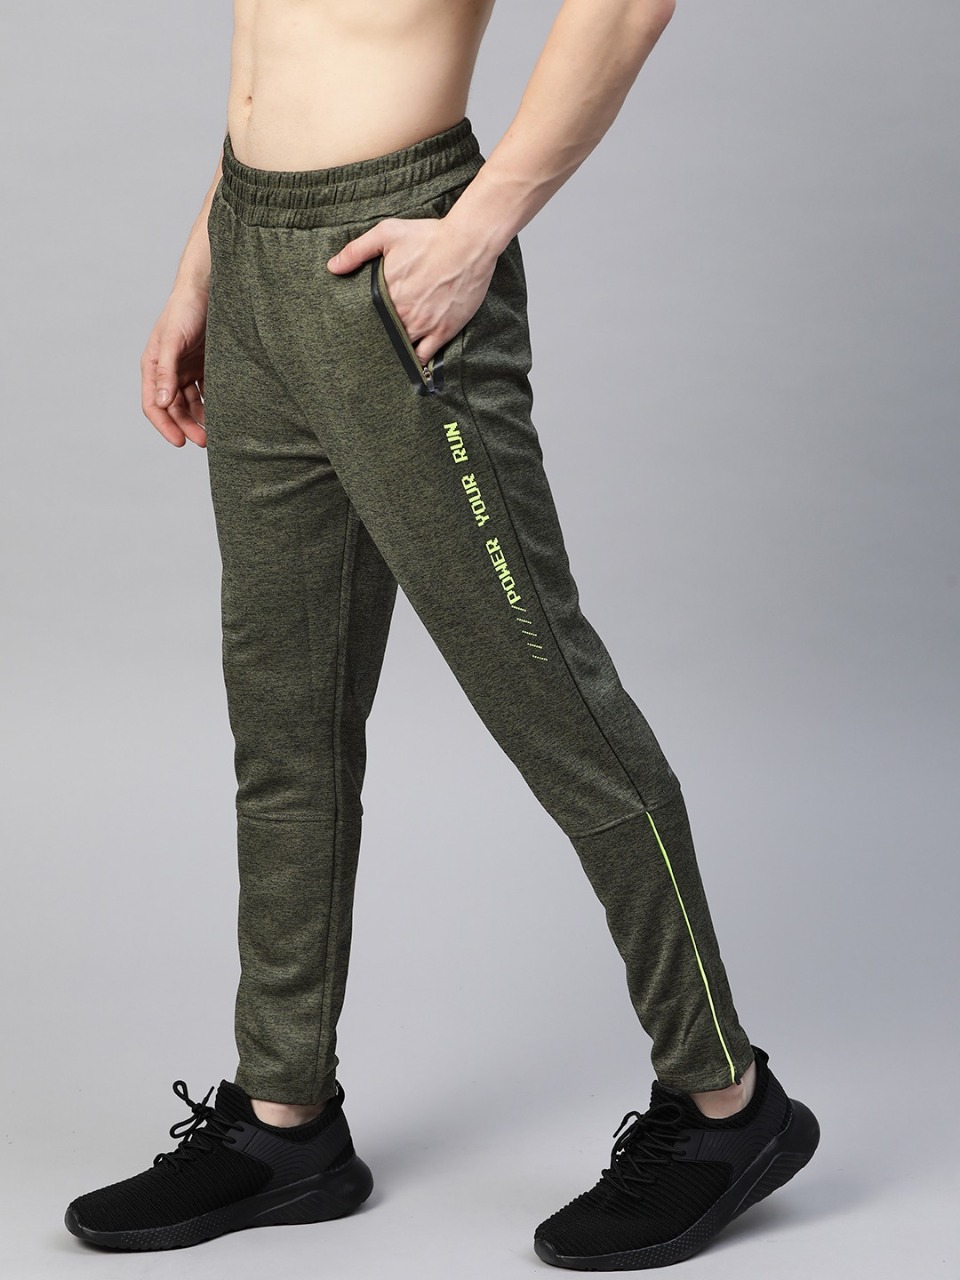 HRX by Hrithik Roshan Solid Women Olive Track Pants - Buy HRX by Hrithik  Roshan Solid Women Olive Track Pants Online at Best Prices in India |  Flipkart.com